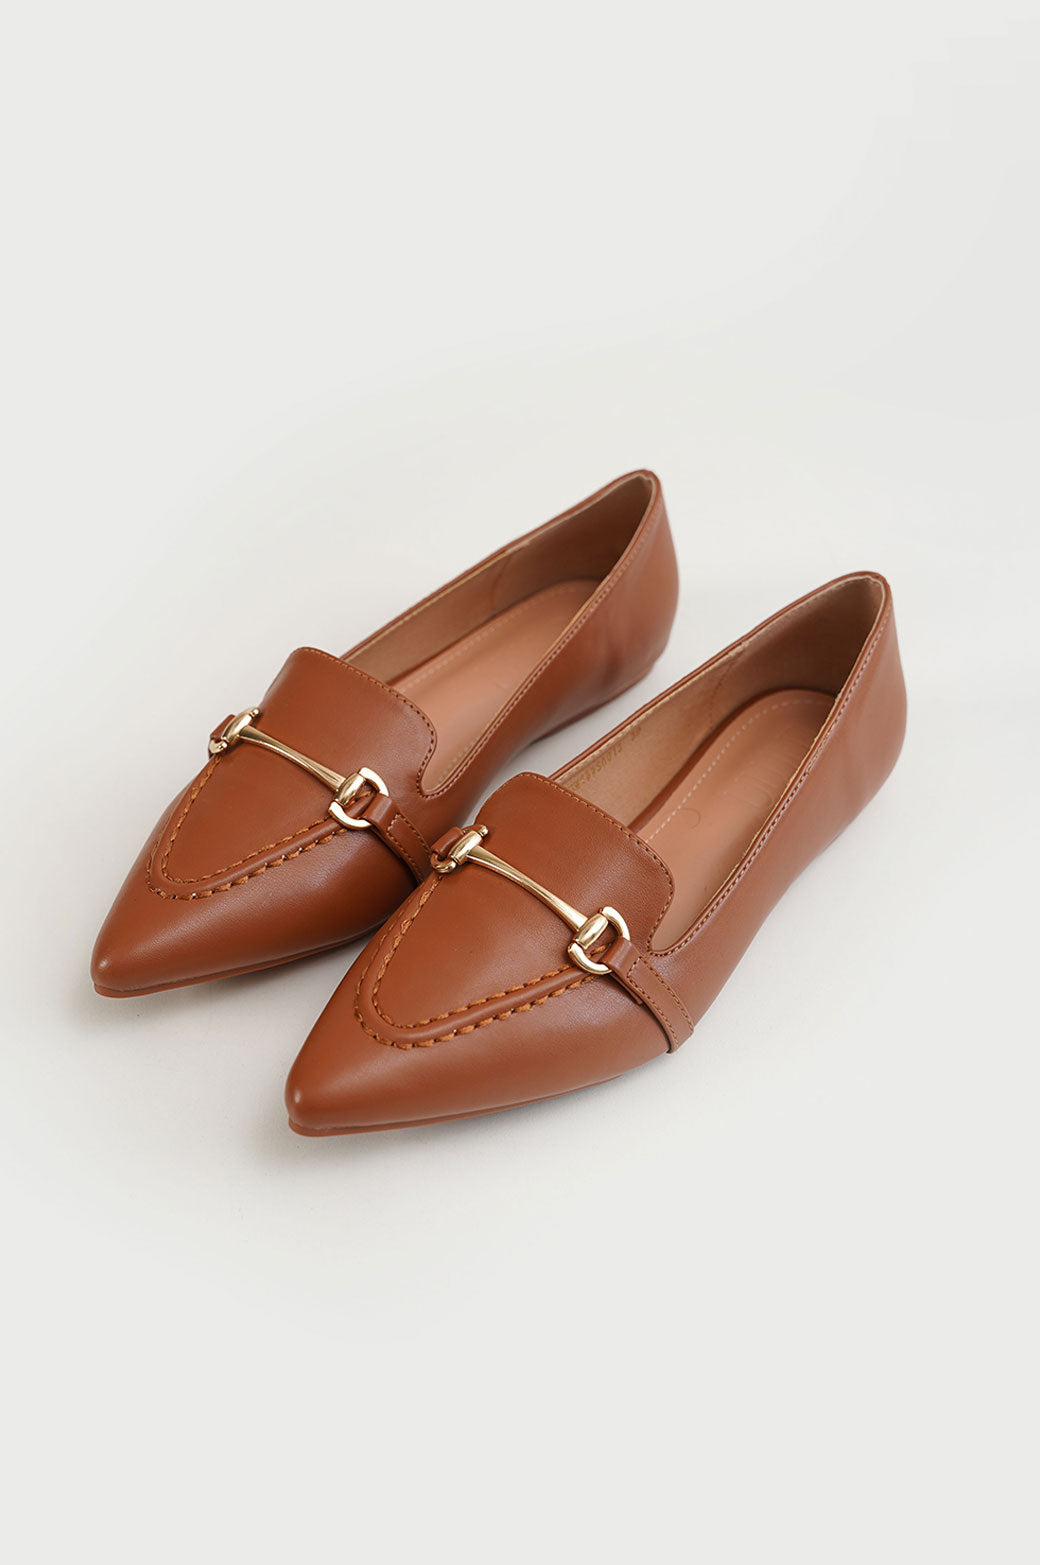 BROWN POINTED PUMPS